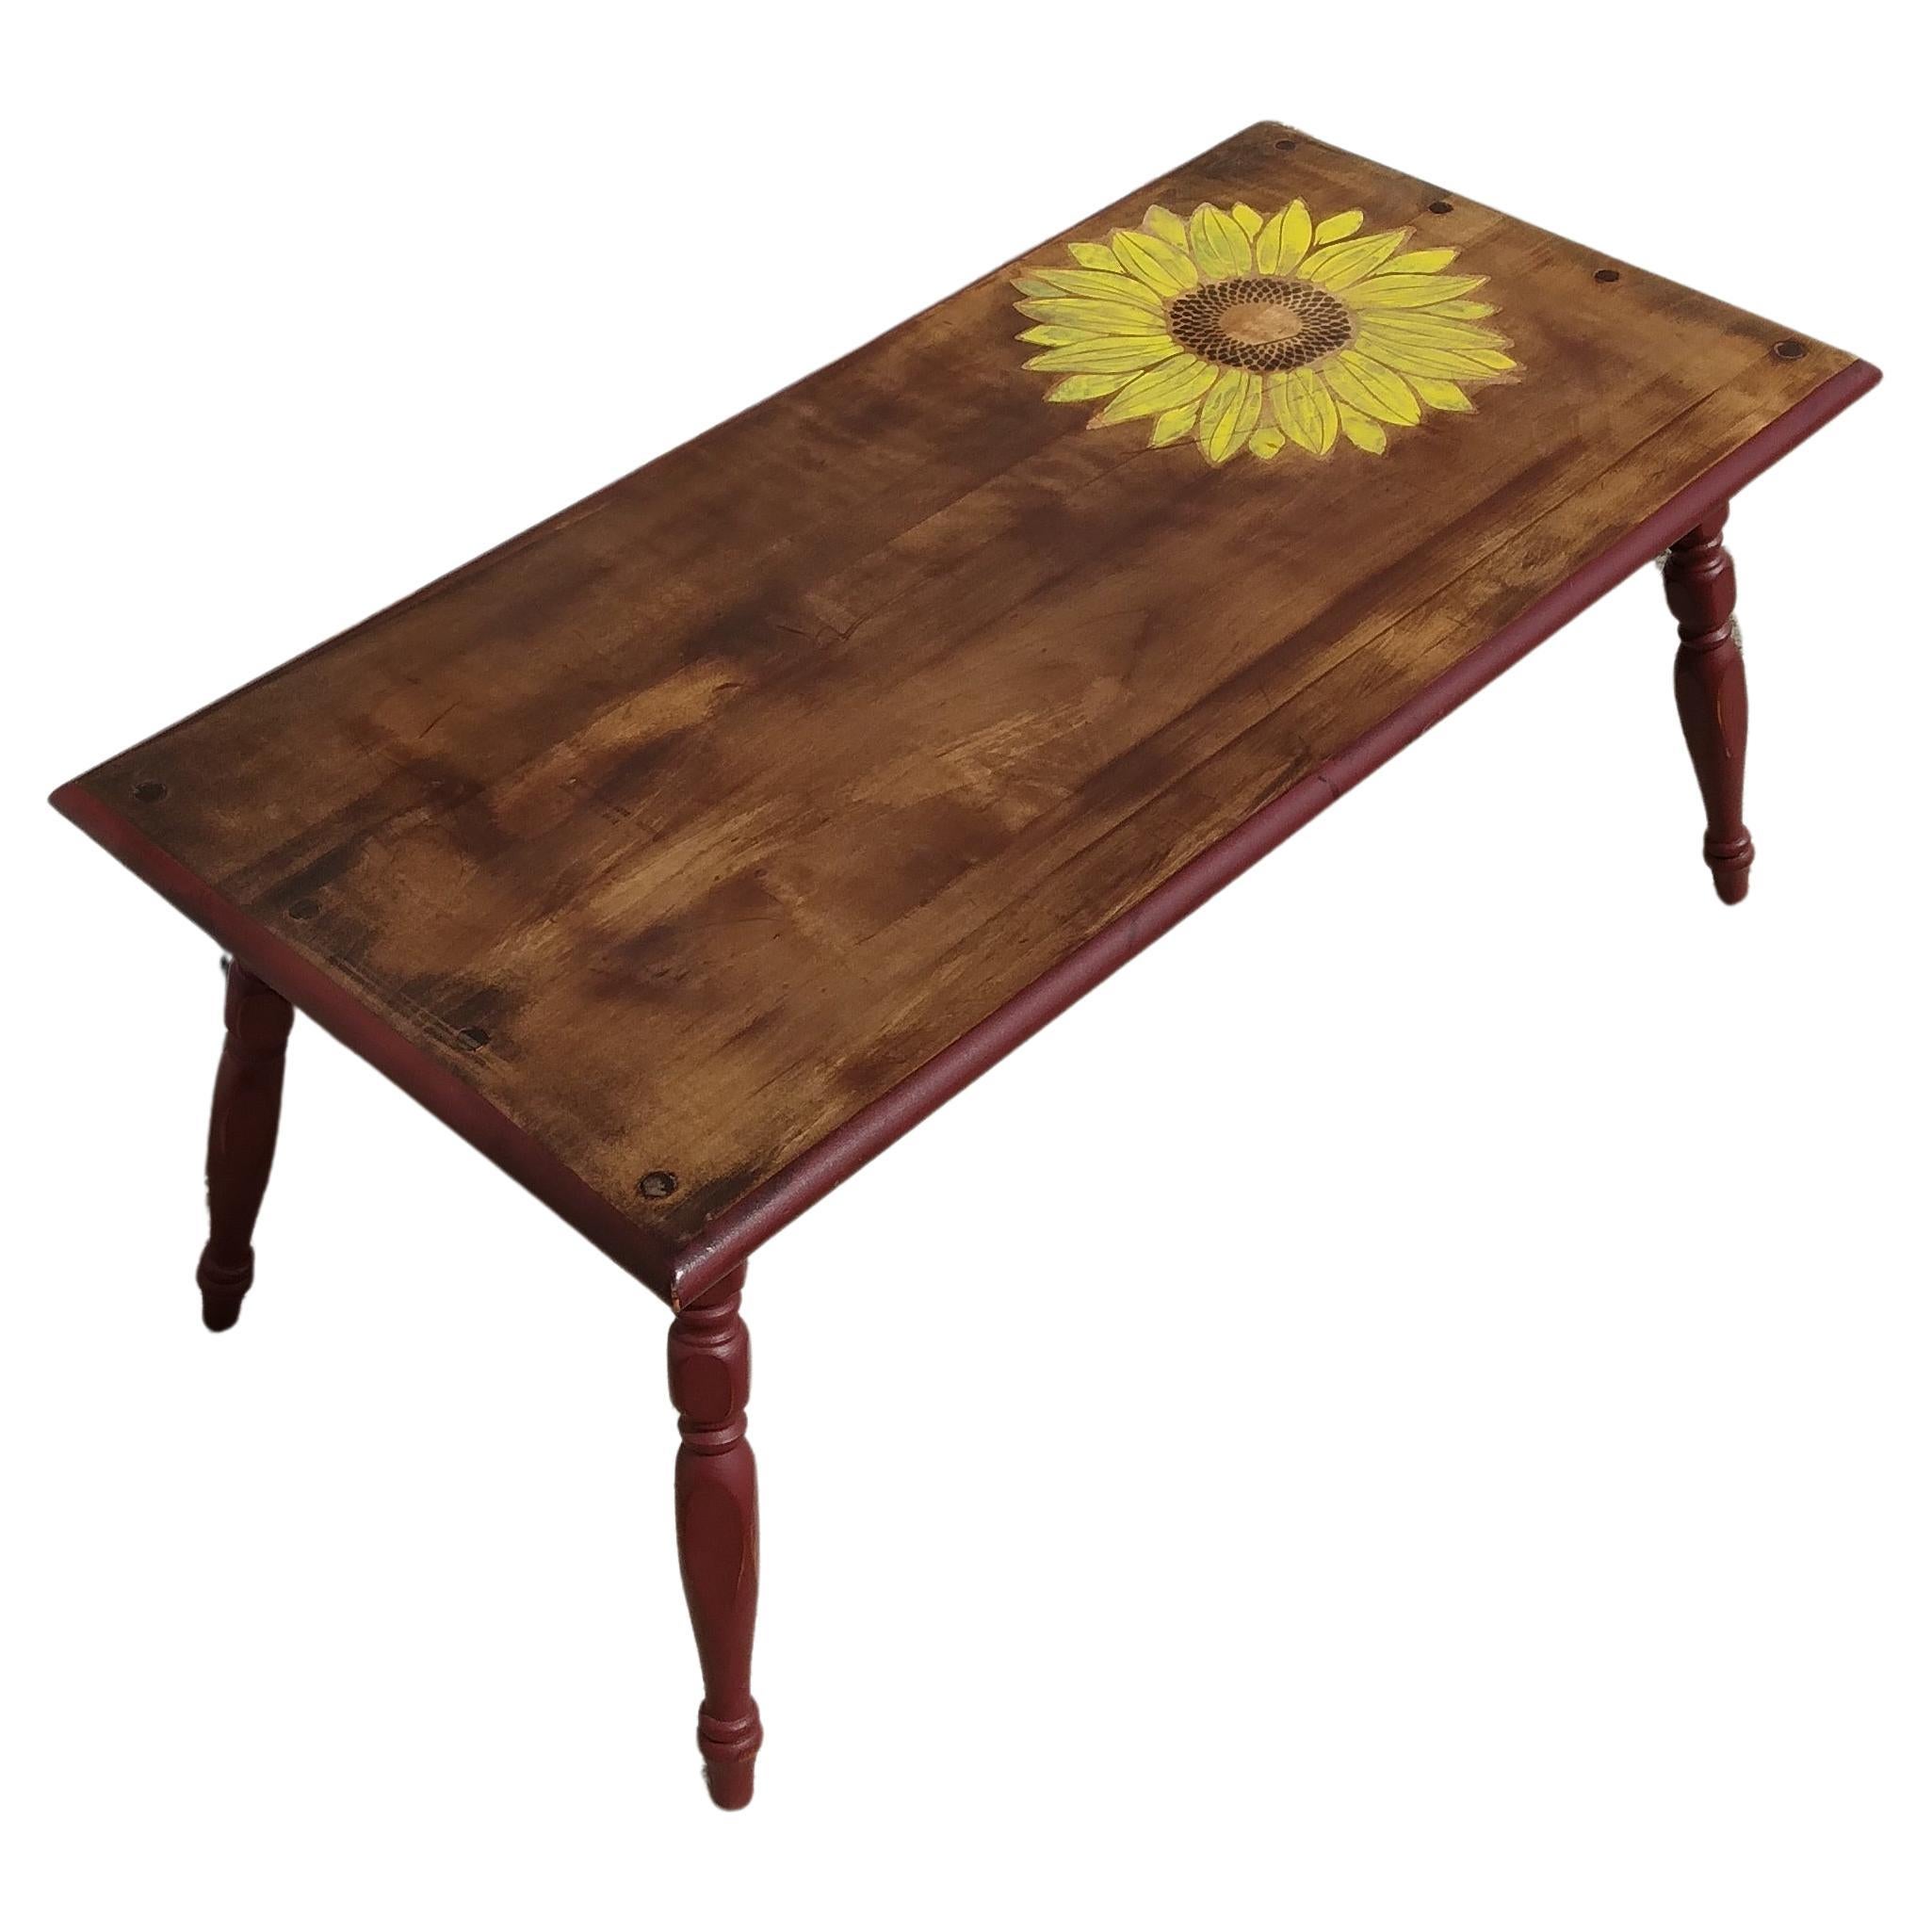 Vintage Accent Table Plant Stand with Sunflower